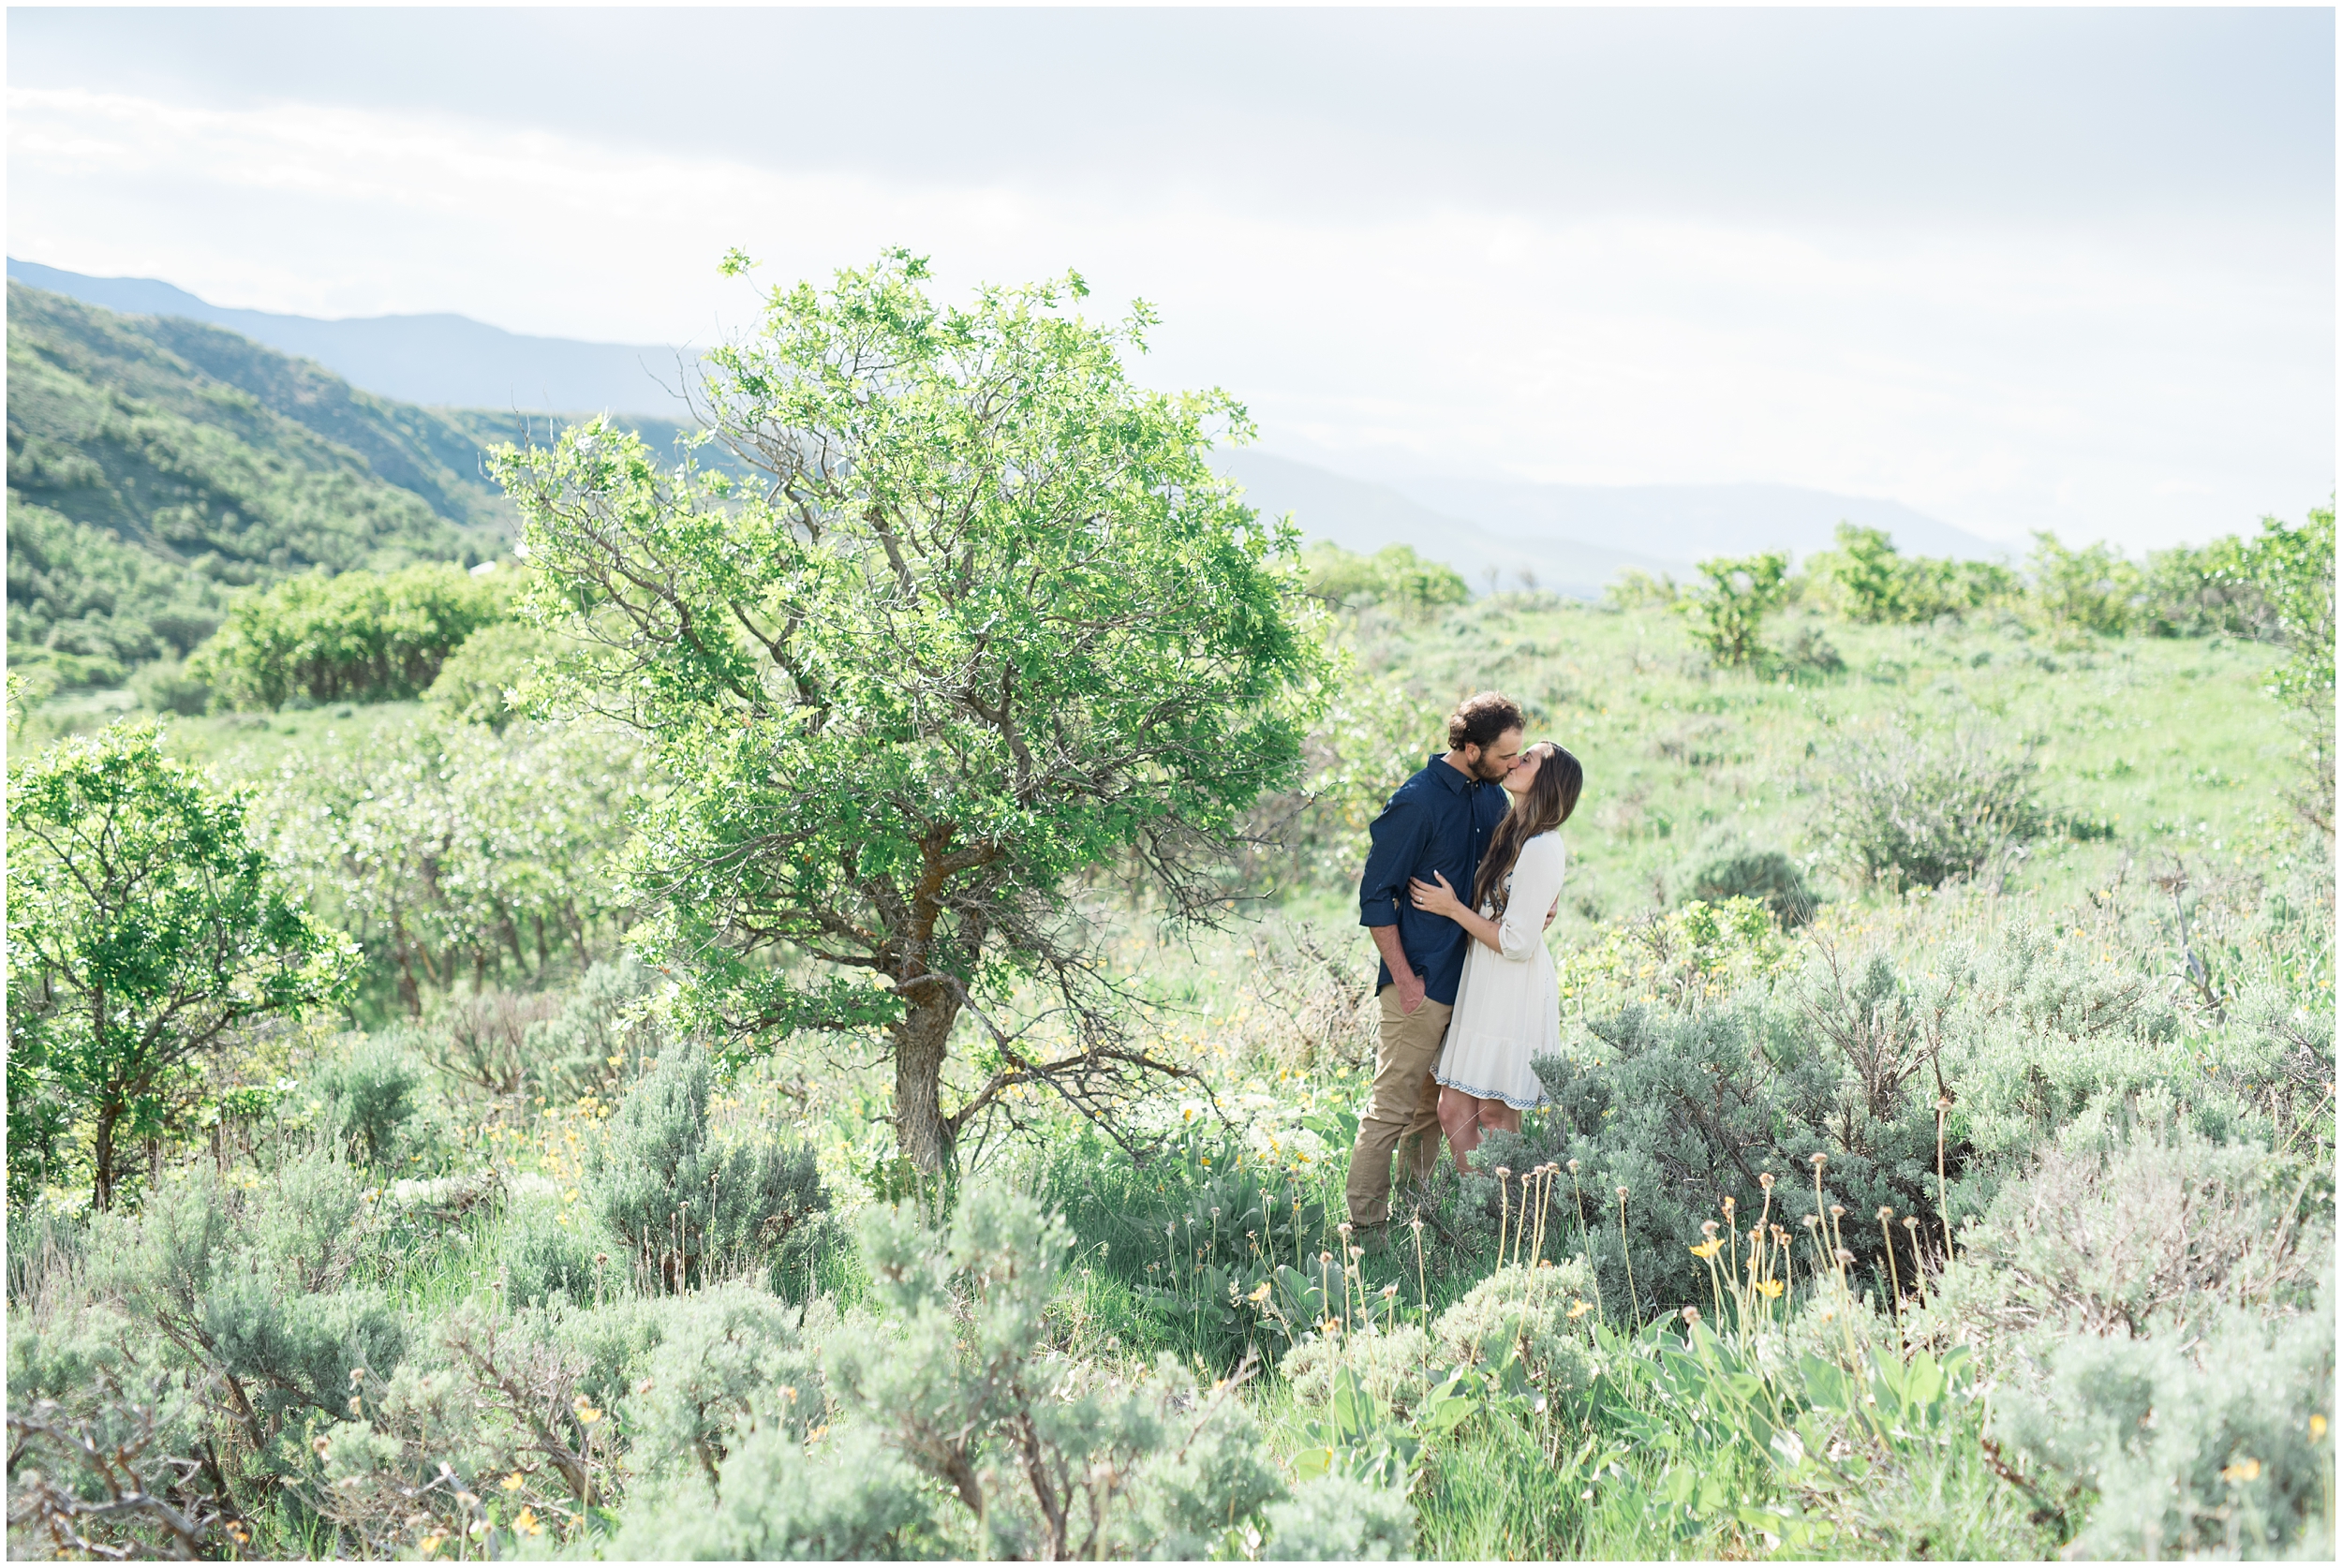 Outdoor engagements, forest engagements, cream and blue wedding, bohemian wedding, pine tree engagements, cream wedding dress, Utah wedding photographers, Utah wedding photographer, Utah wedding photography, Utah county wedding photography, Utah county wedding photographer, salt lake city photographers, salt lake city wedding photography, salt lake photographers, salt lake city photographers, photographers in Utah, Utah photography, photography Utah, photographer Utah, Kristina Curtis photography, Kristina Curtis Photographer, www.kristinacurtisphotography.com